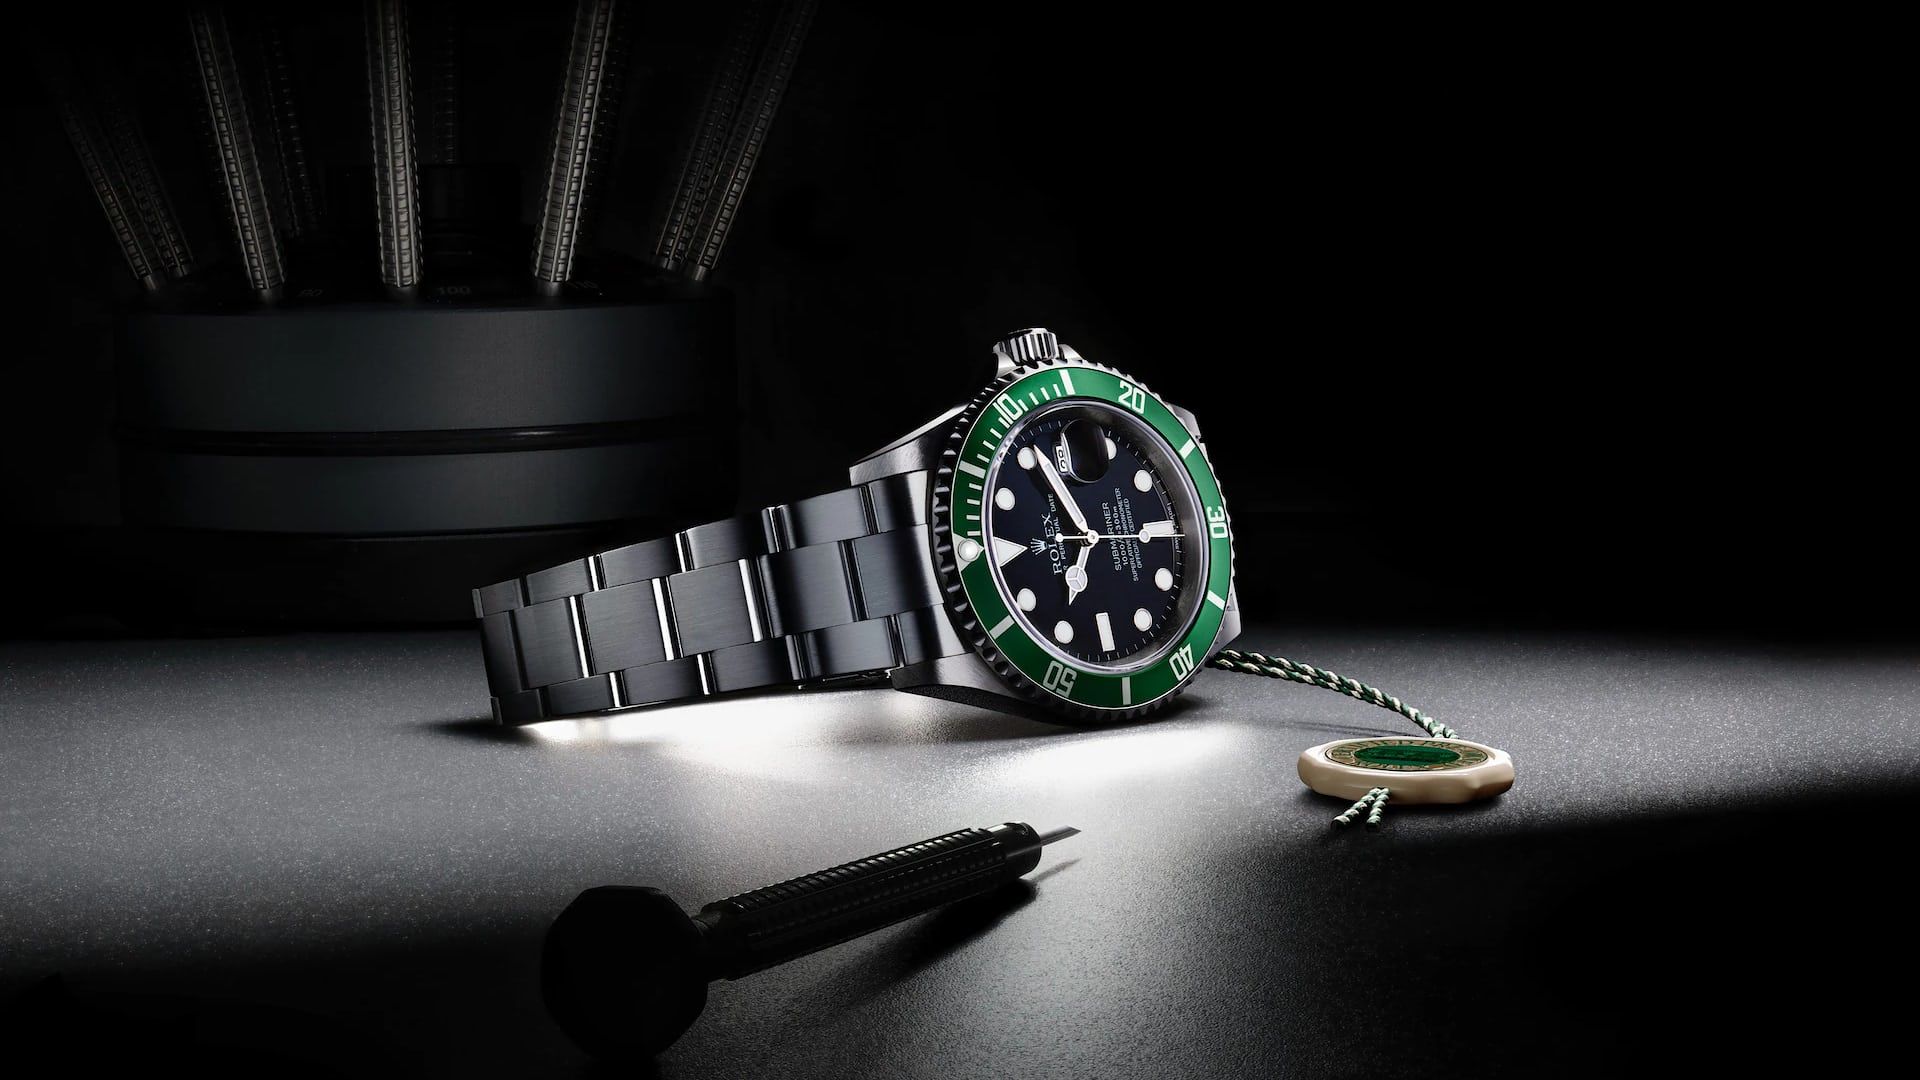  1920x1080 Hulk Hintergrundbild 1920x1080. Rolex Officially Launches Its Certified Pre Owned Program In The United States